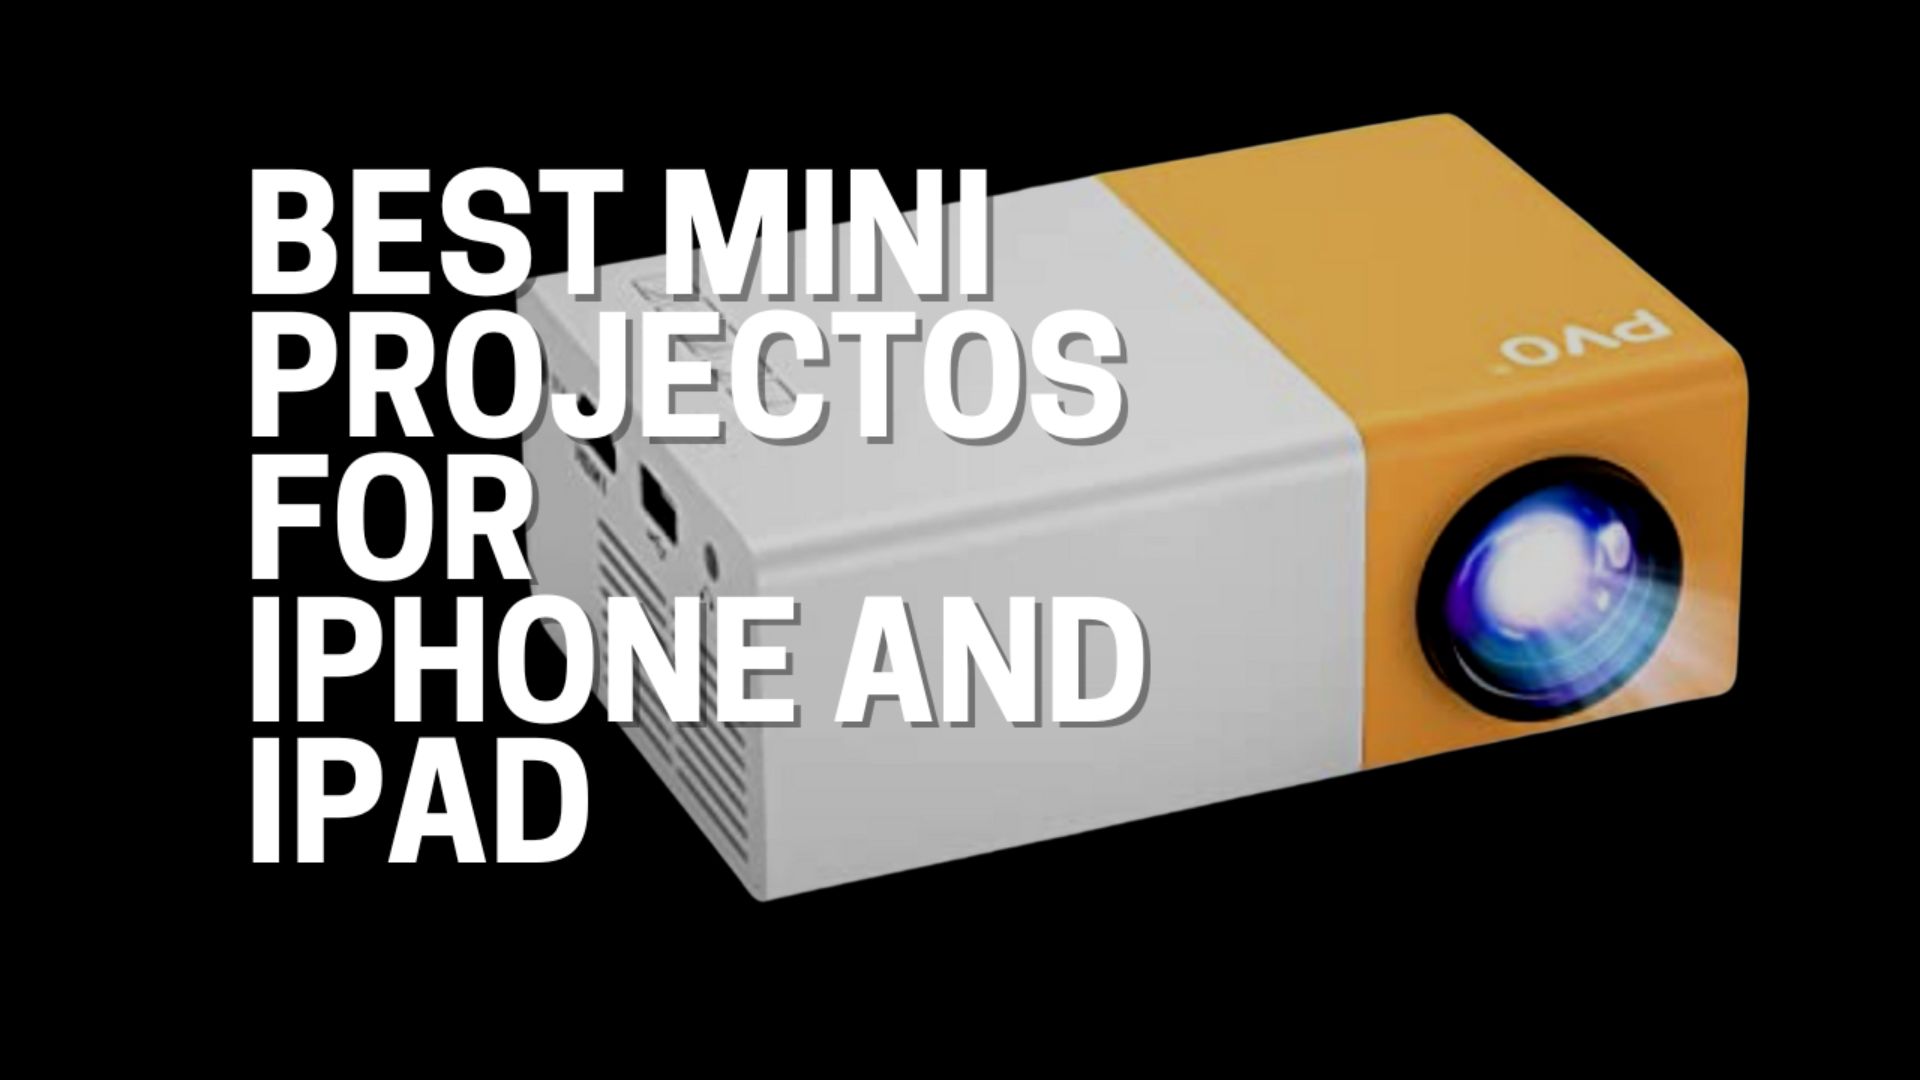 Best Mini Projectors for iPhone and iPad